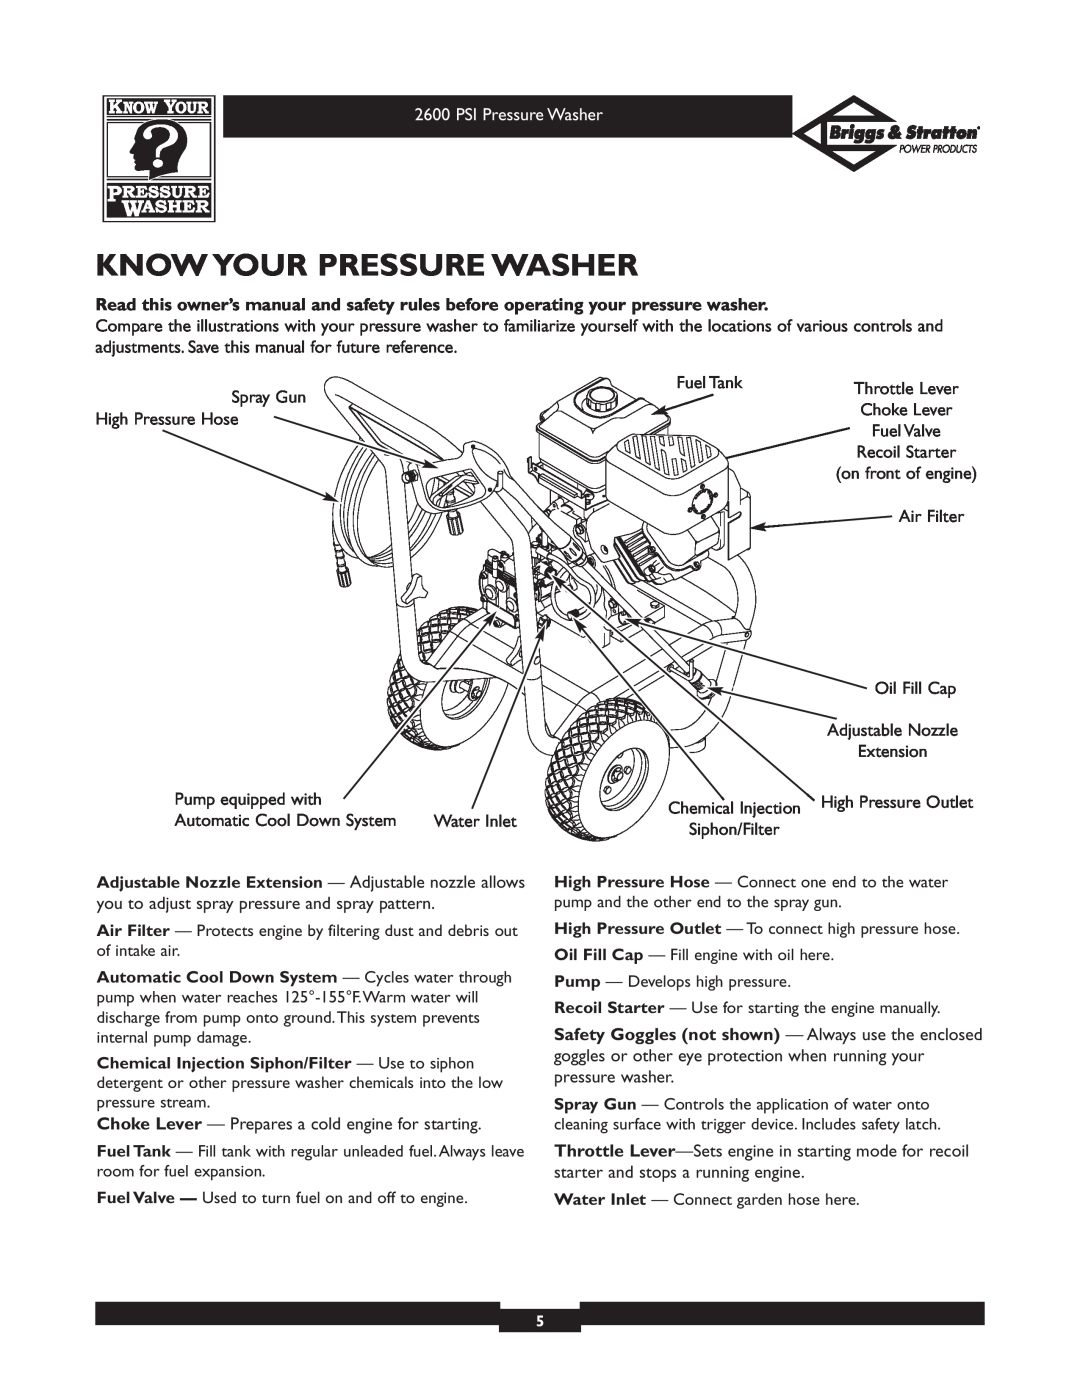 Briggs & Stratton 20216 Know Your Pressure Washer, Safety Goggles not shown - Always use the enclosed, PSI Pressure Washer 